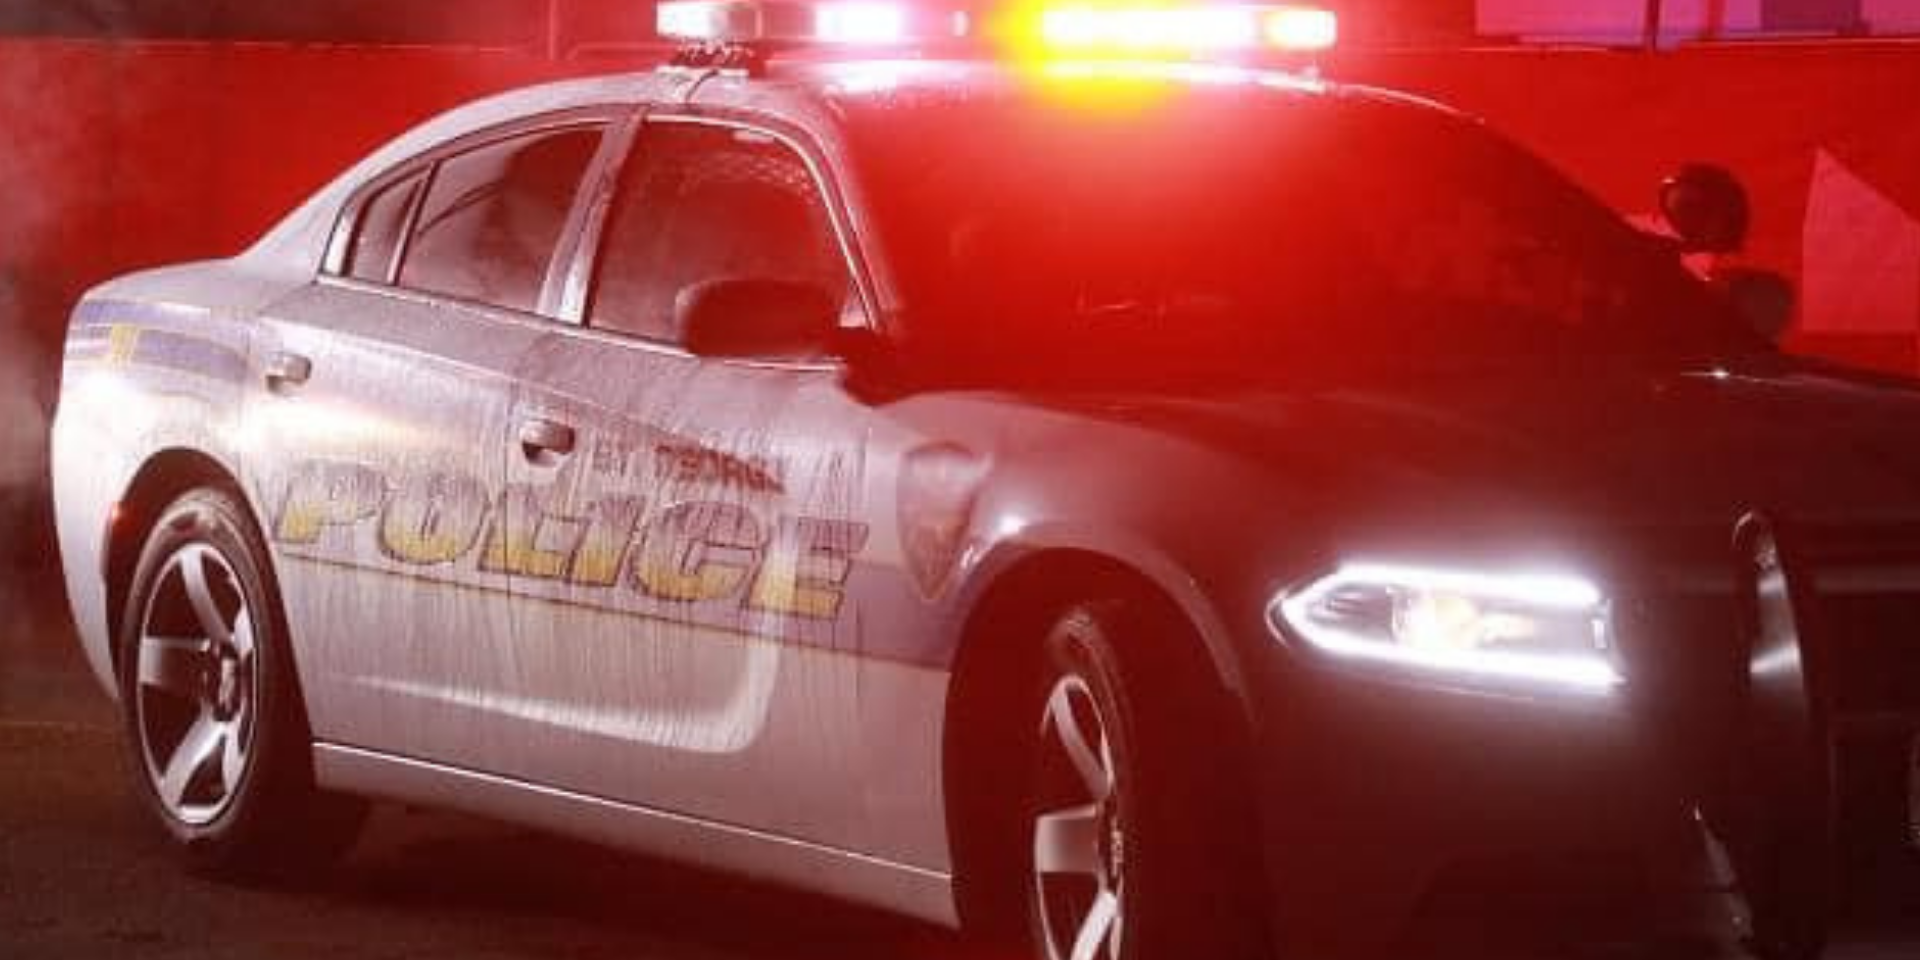 SAINT GEORGE, Utah -- A high-speed pursuit started in St. George Saturday and ended in Mesquite, Ar...